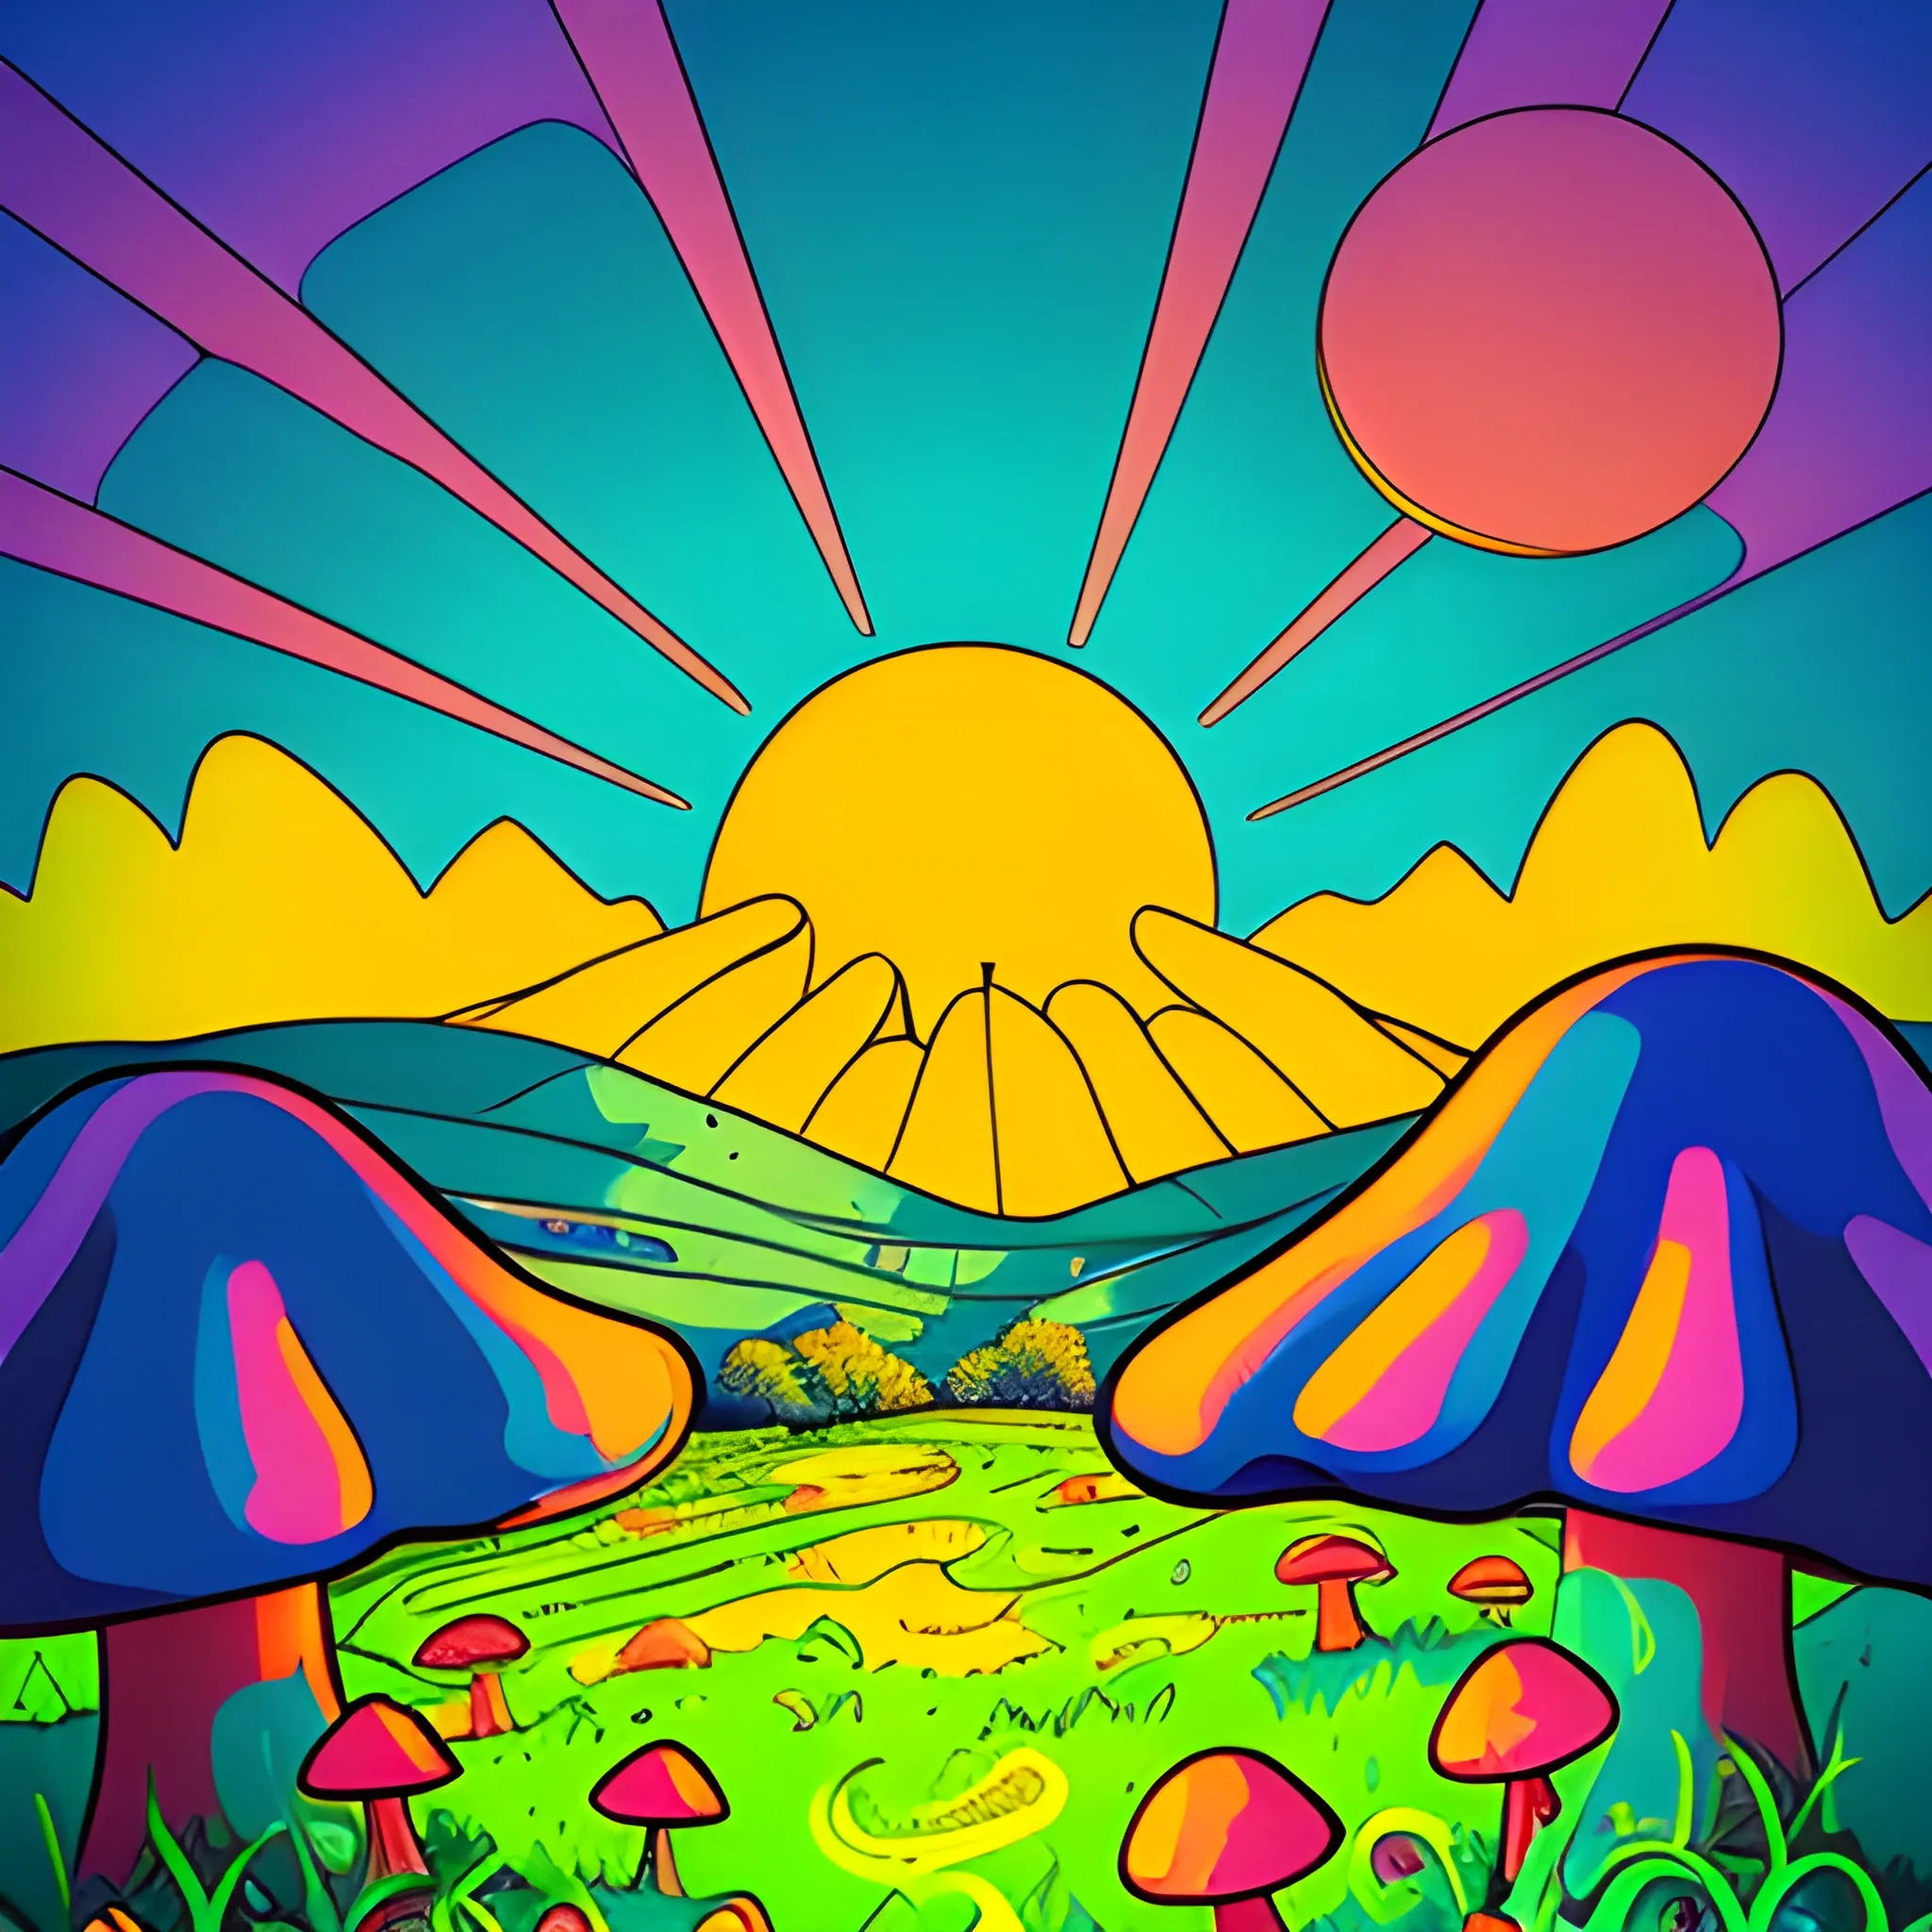 2d, Cartoon, psychedelic vibe, hills with mushrooms and the sun beaming over